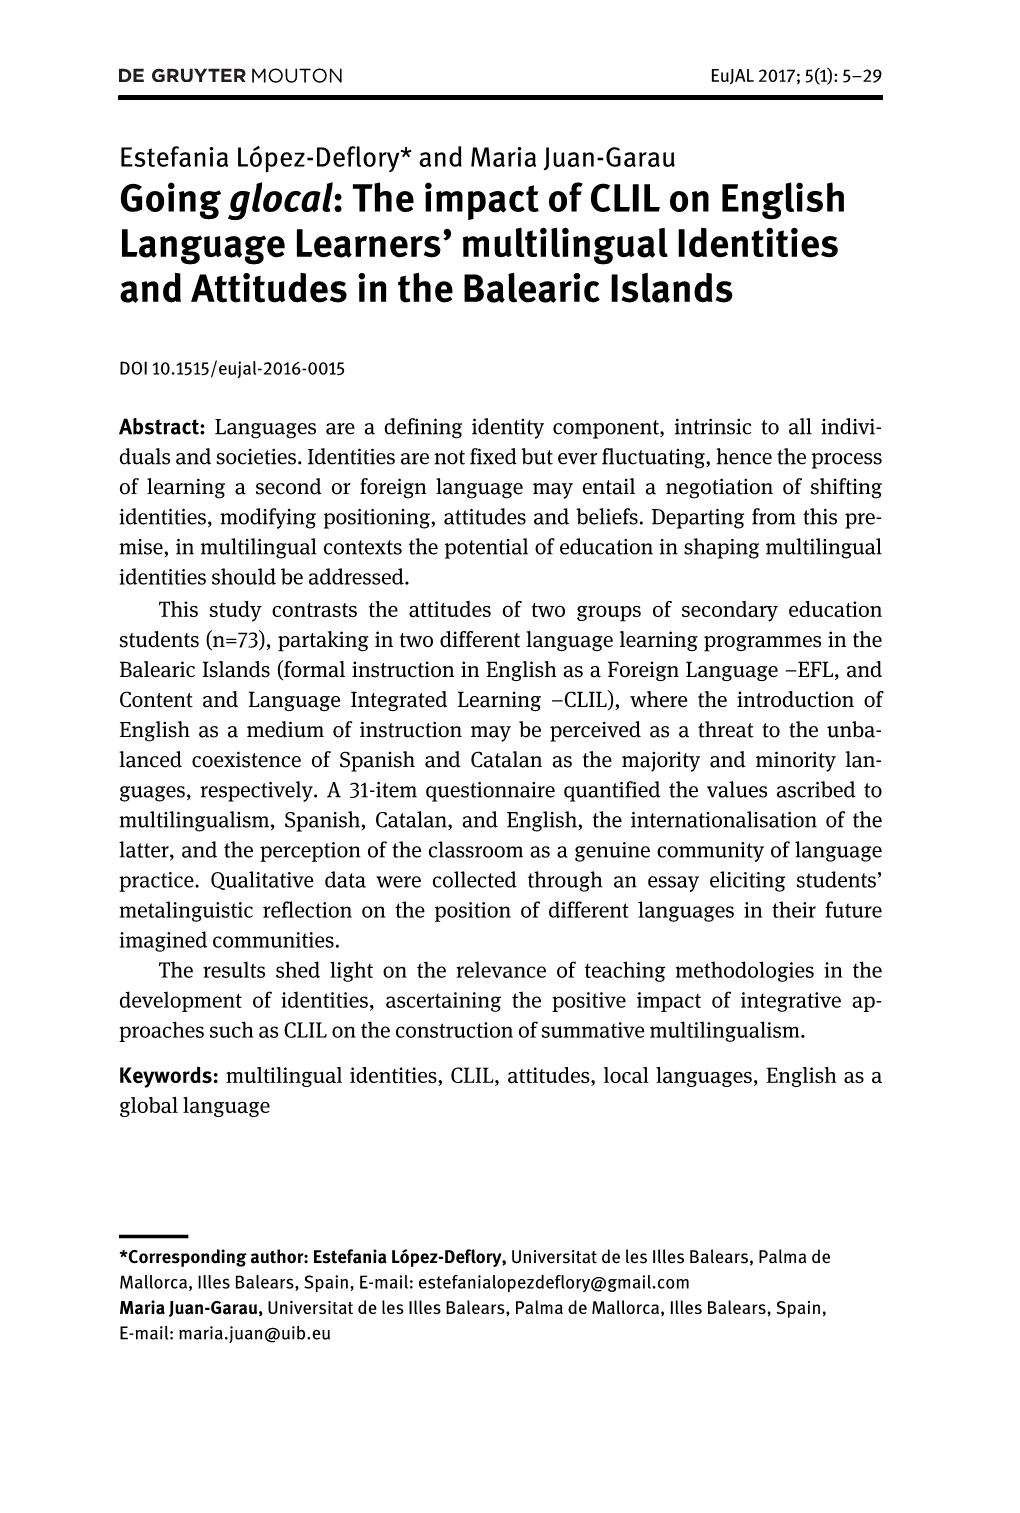 The Impact of CLIL on English Language Learners' Multilingual